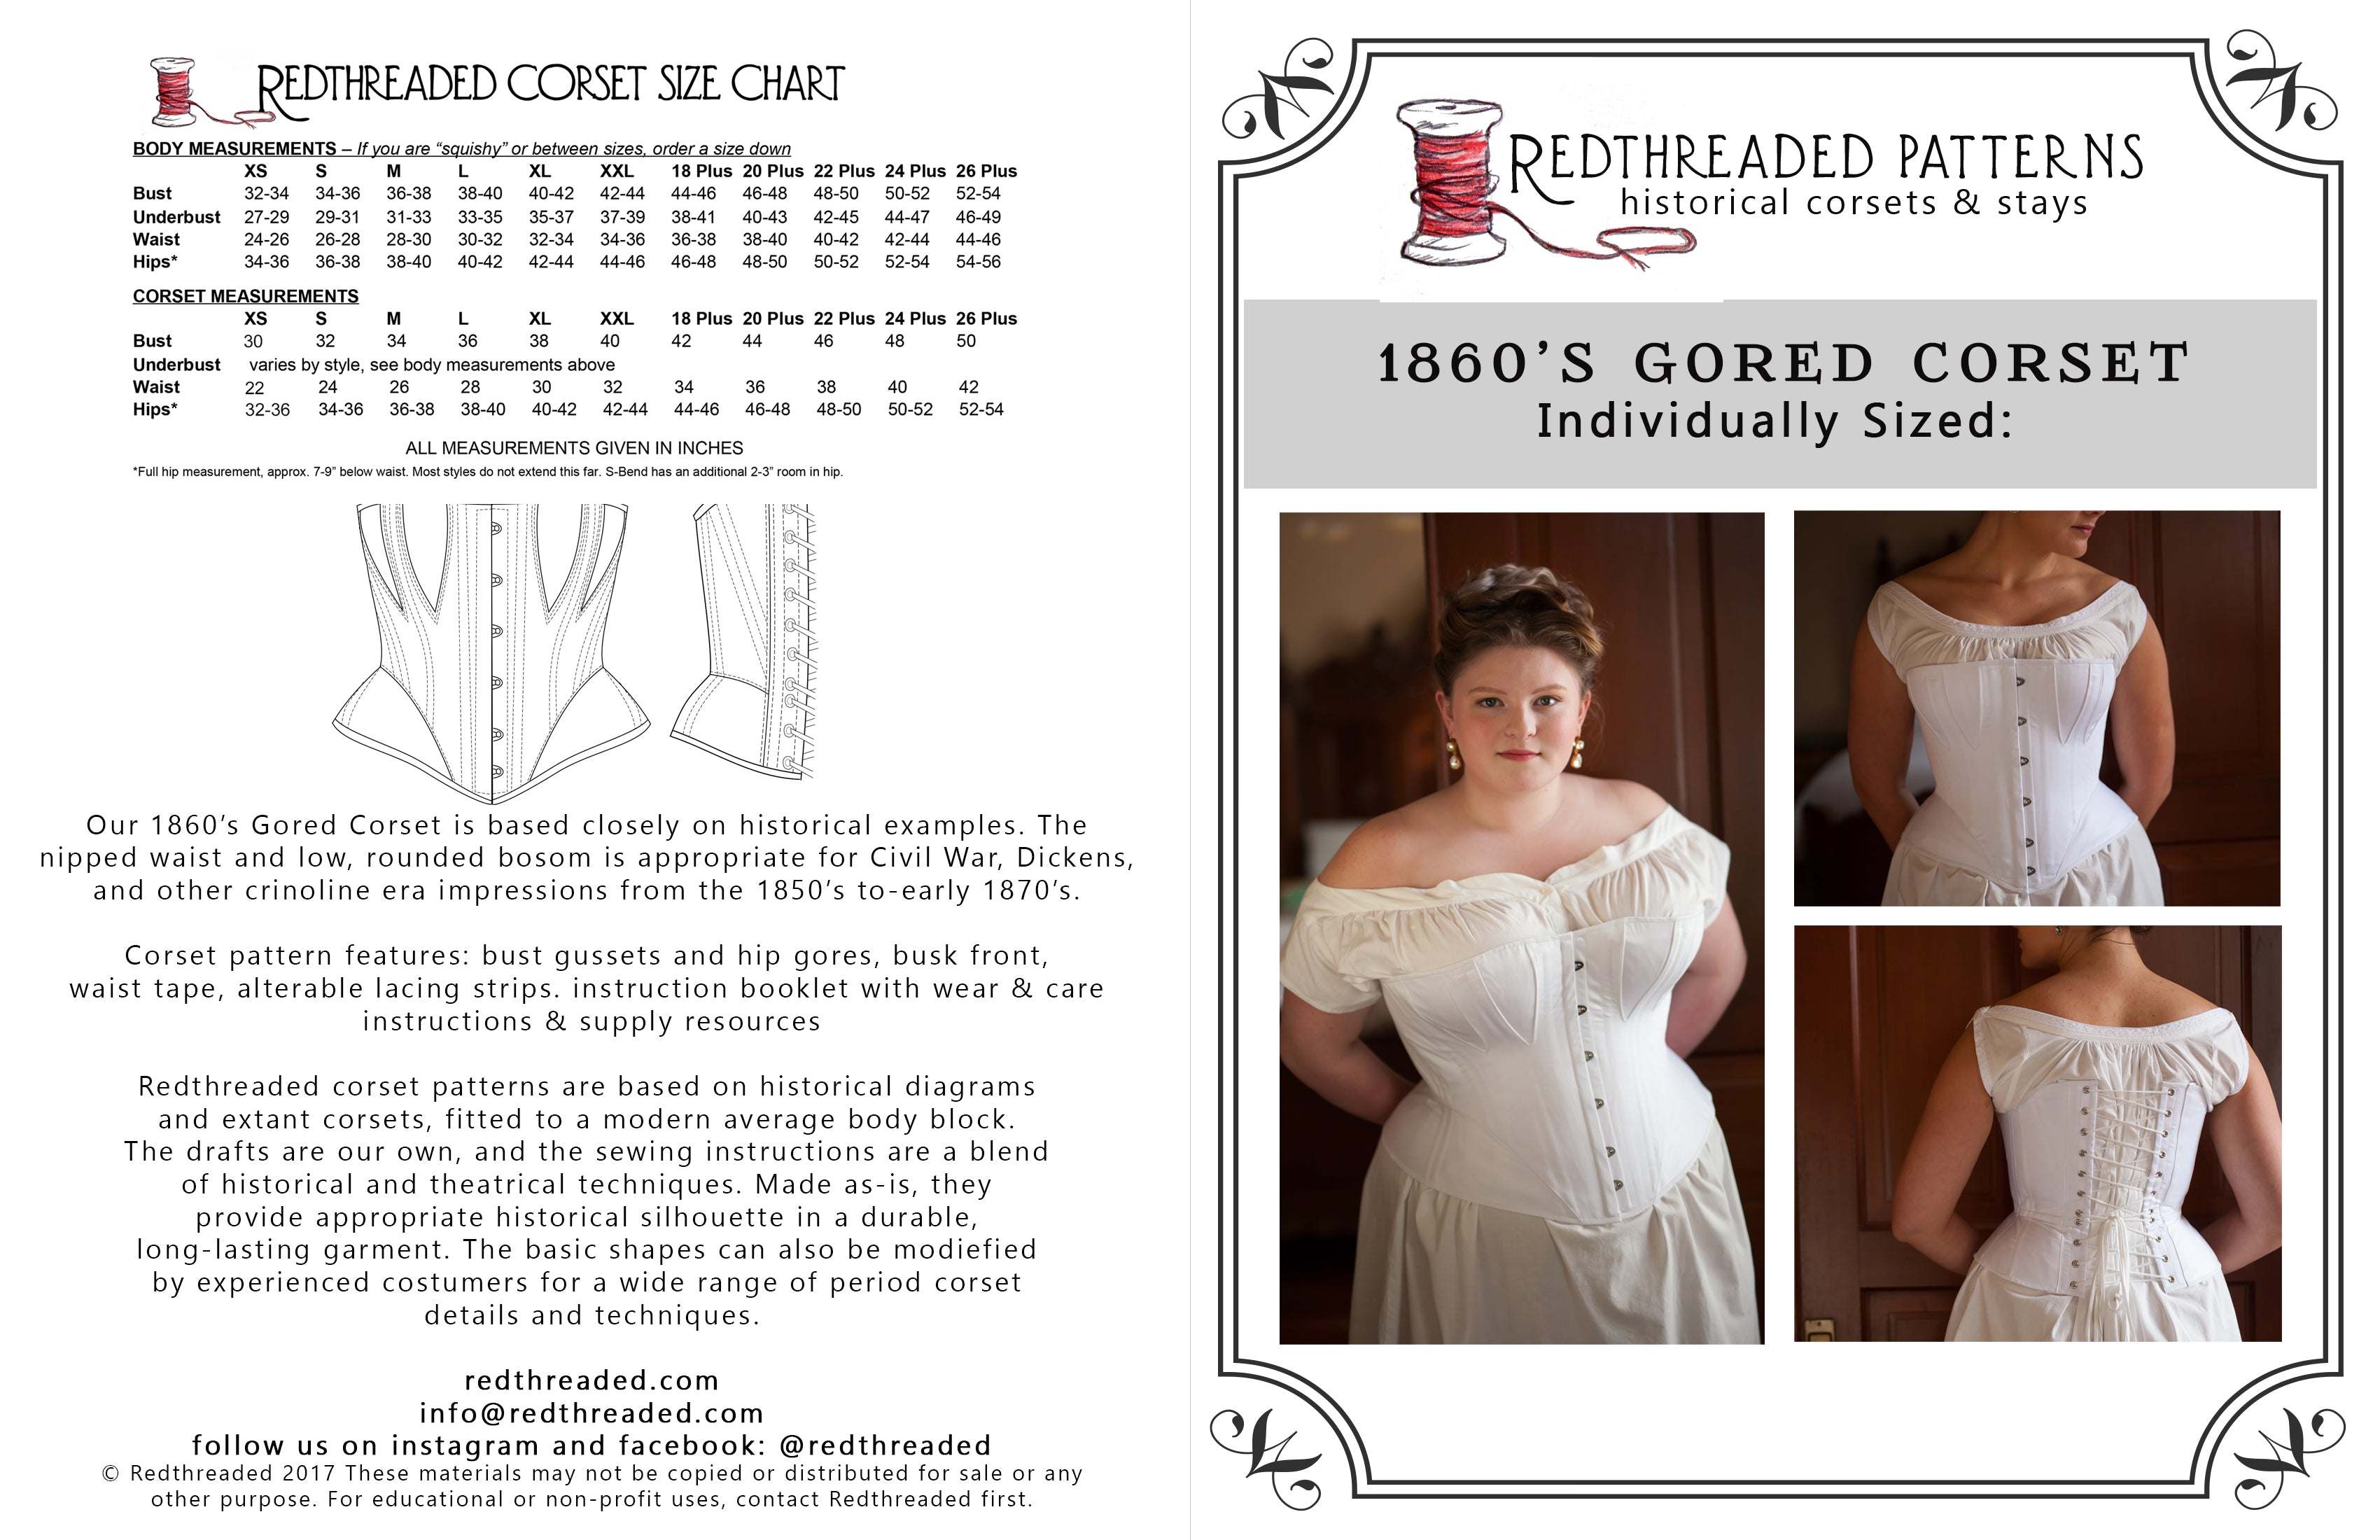 Introducing the 1860's Gored Corset Pattern – Redthreaded